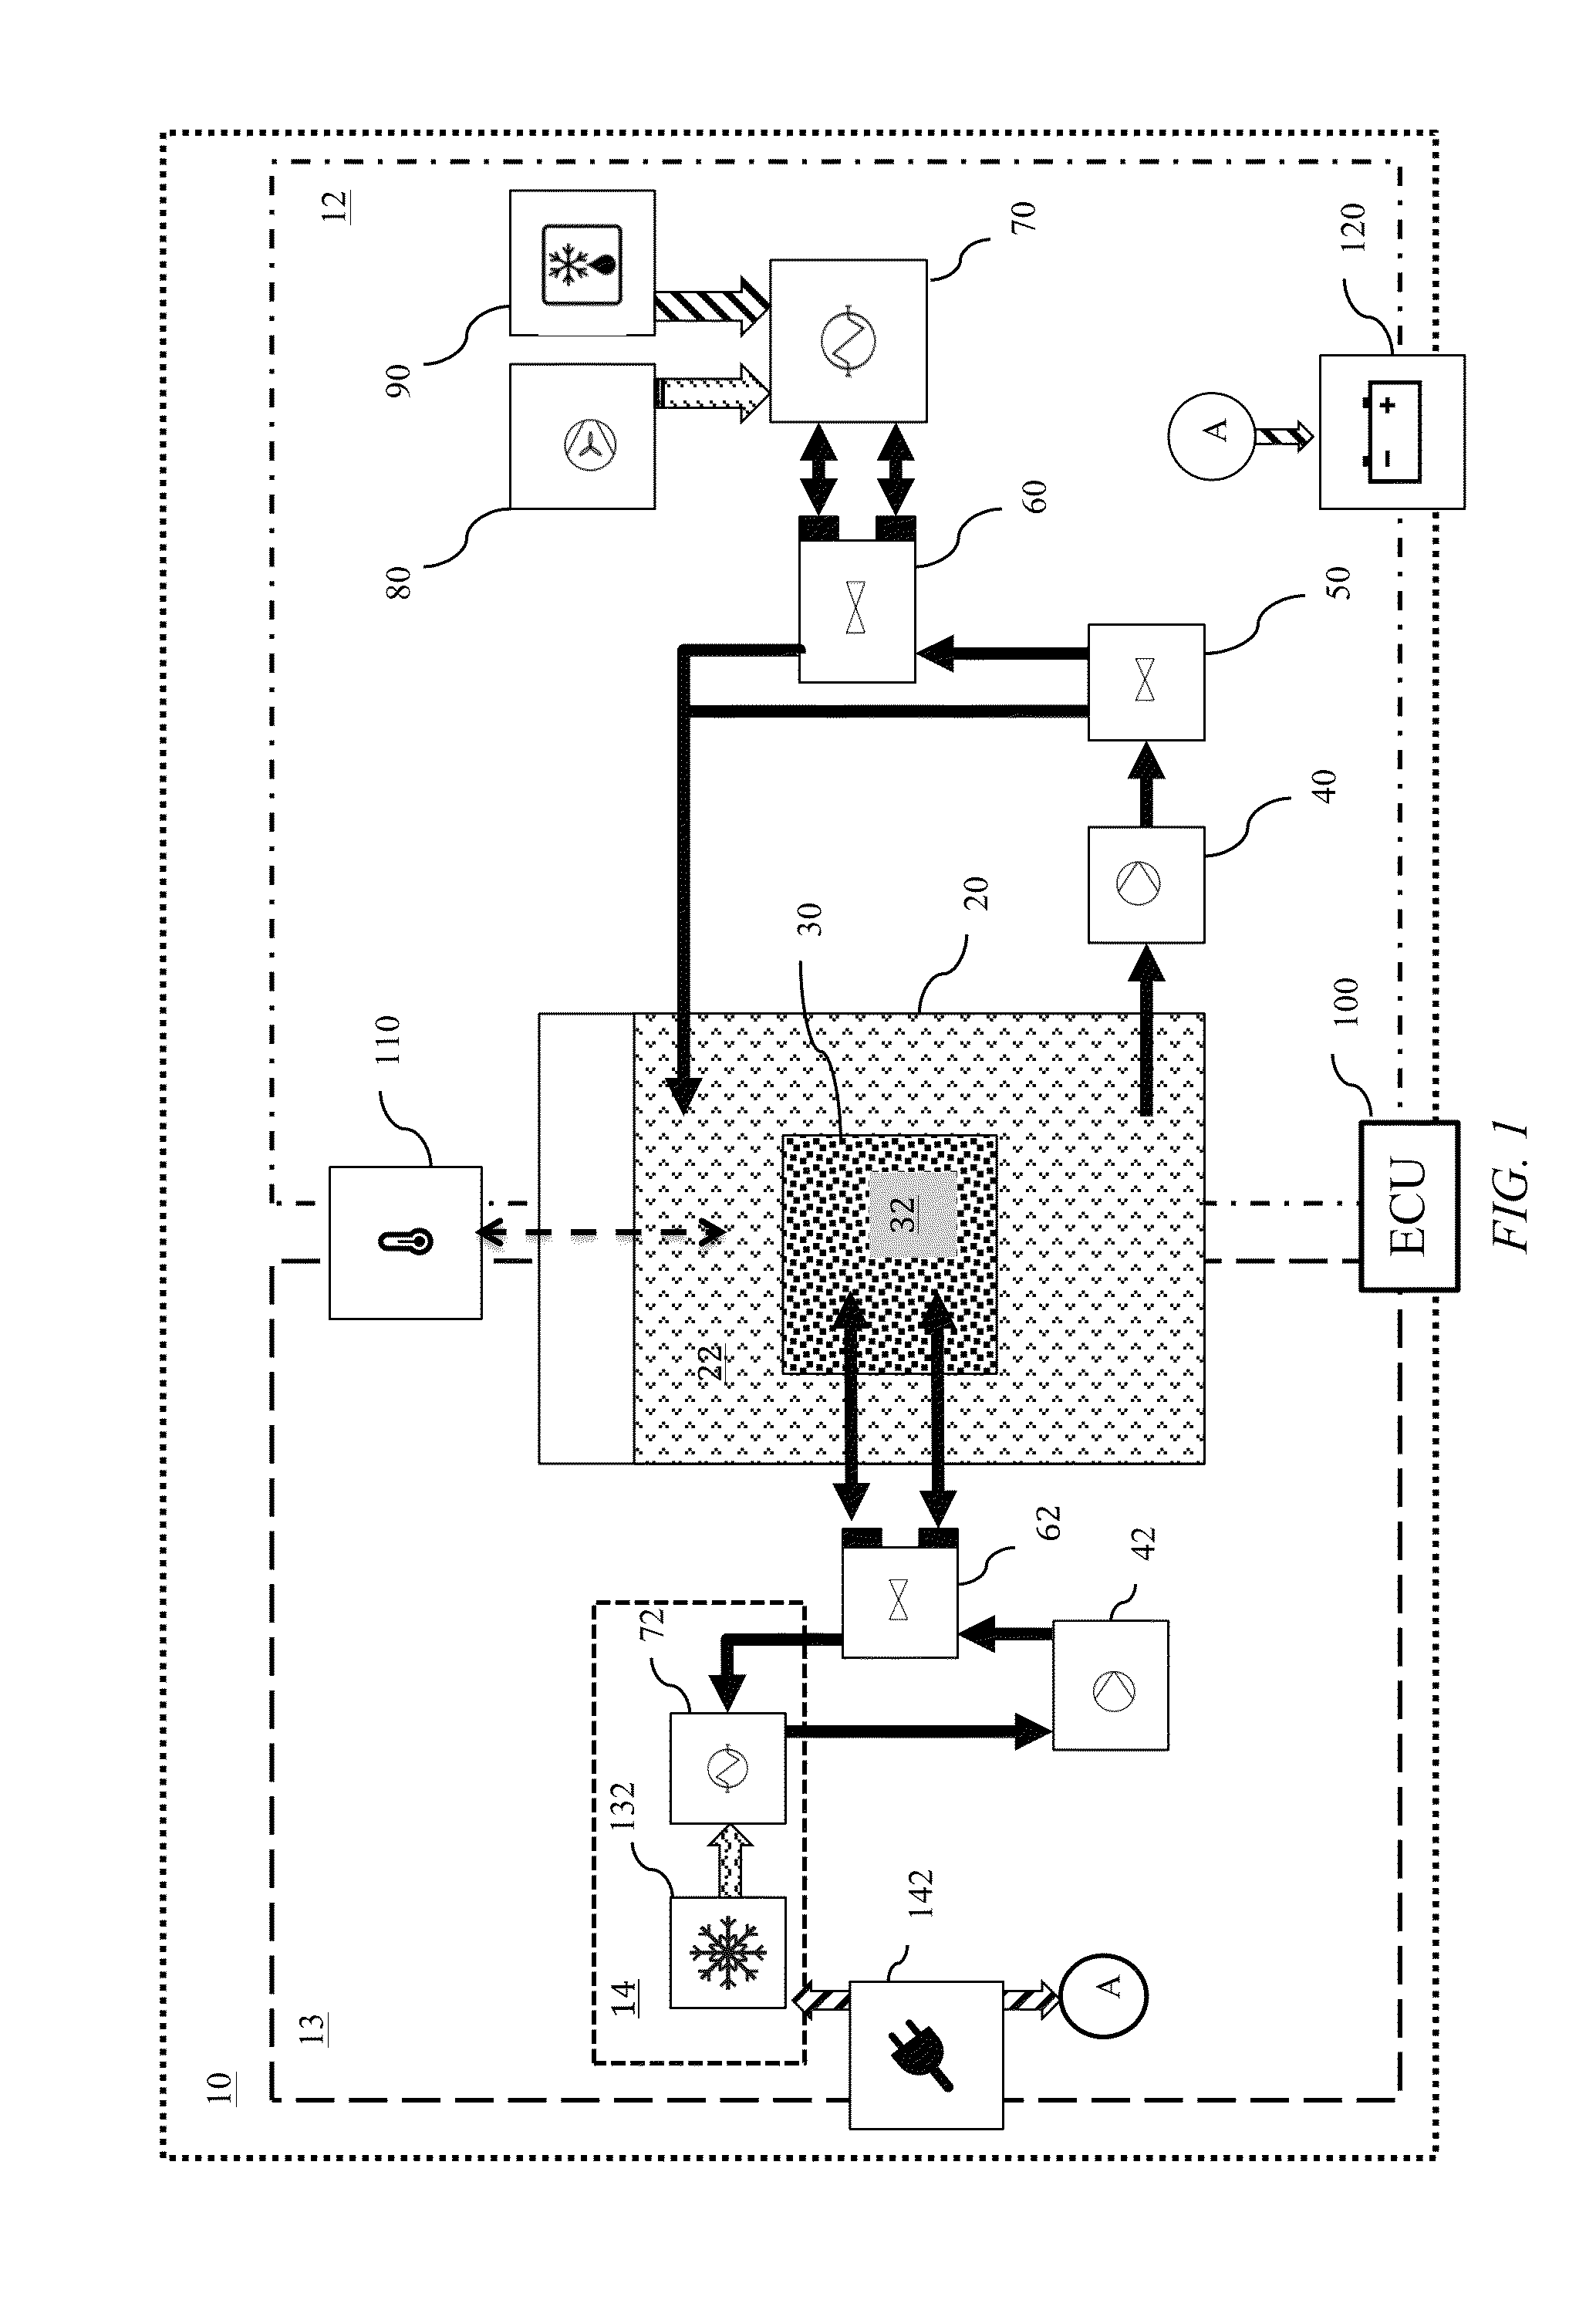 Transportation refrigeration system with integrated power generation and energy storage